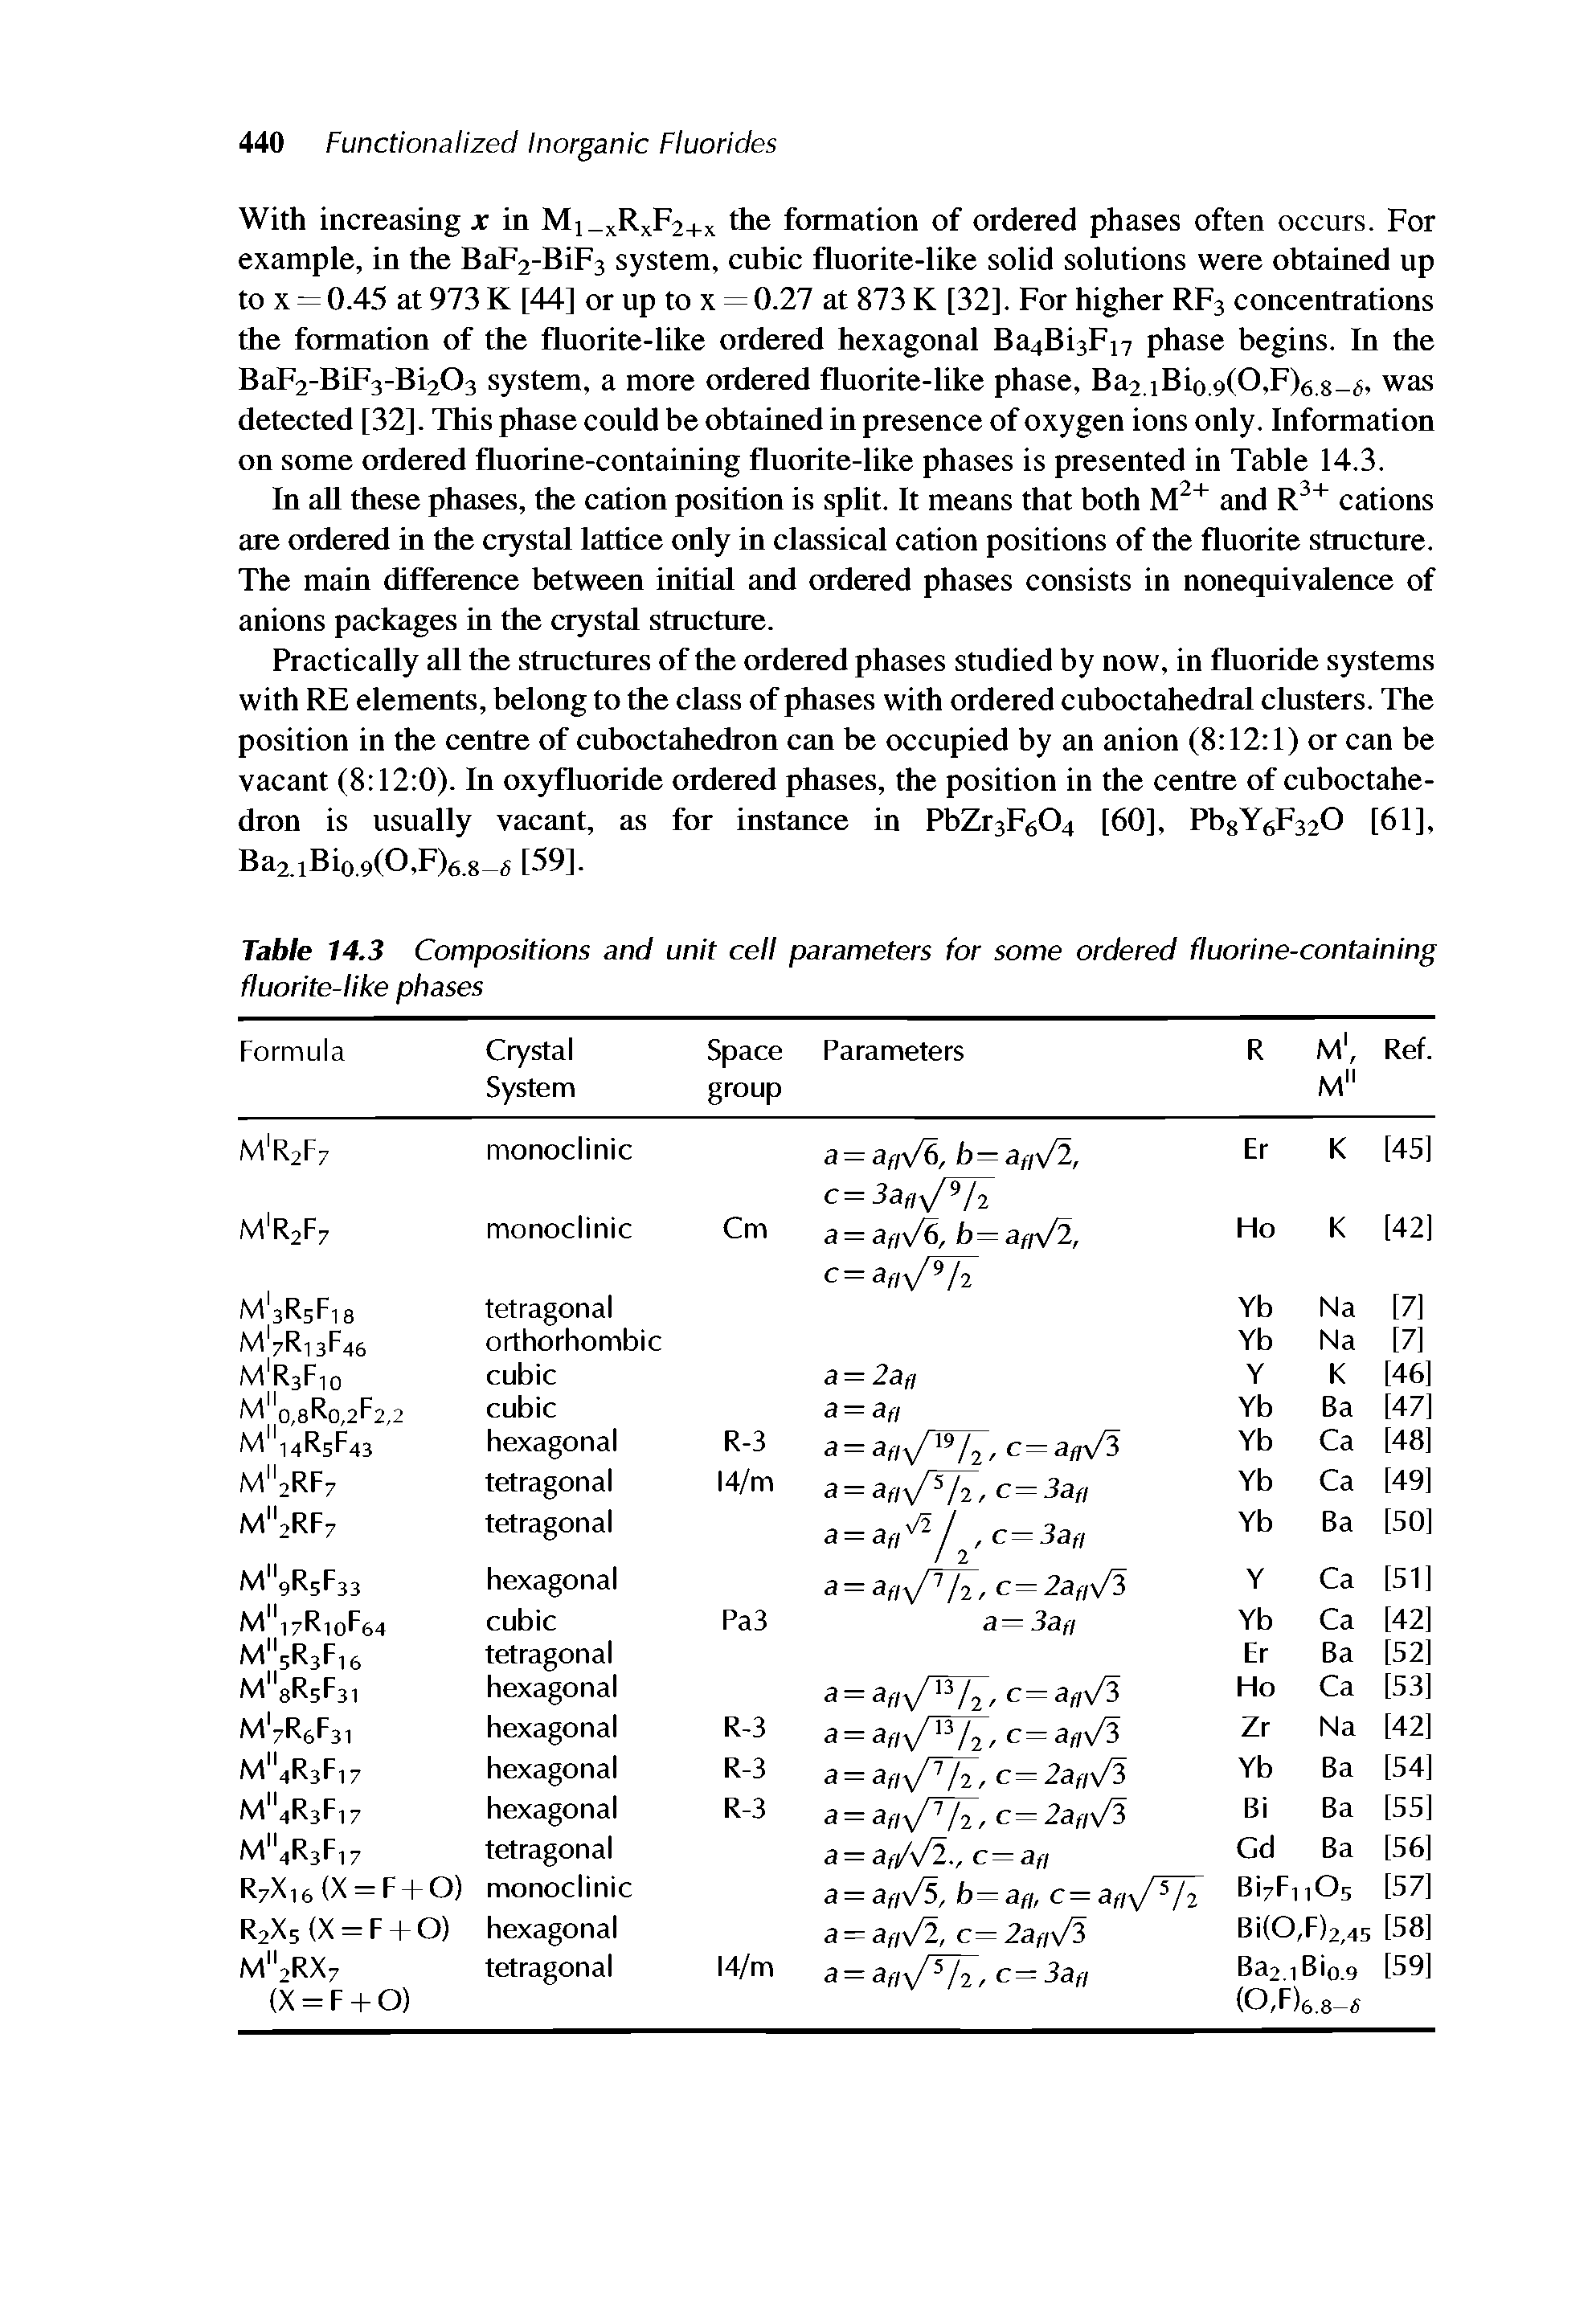 Table 14.3 Compositions and unit cell parameters for some ordered fluorine-containing fluorite-like phases...